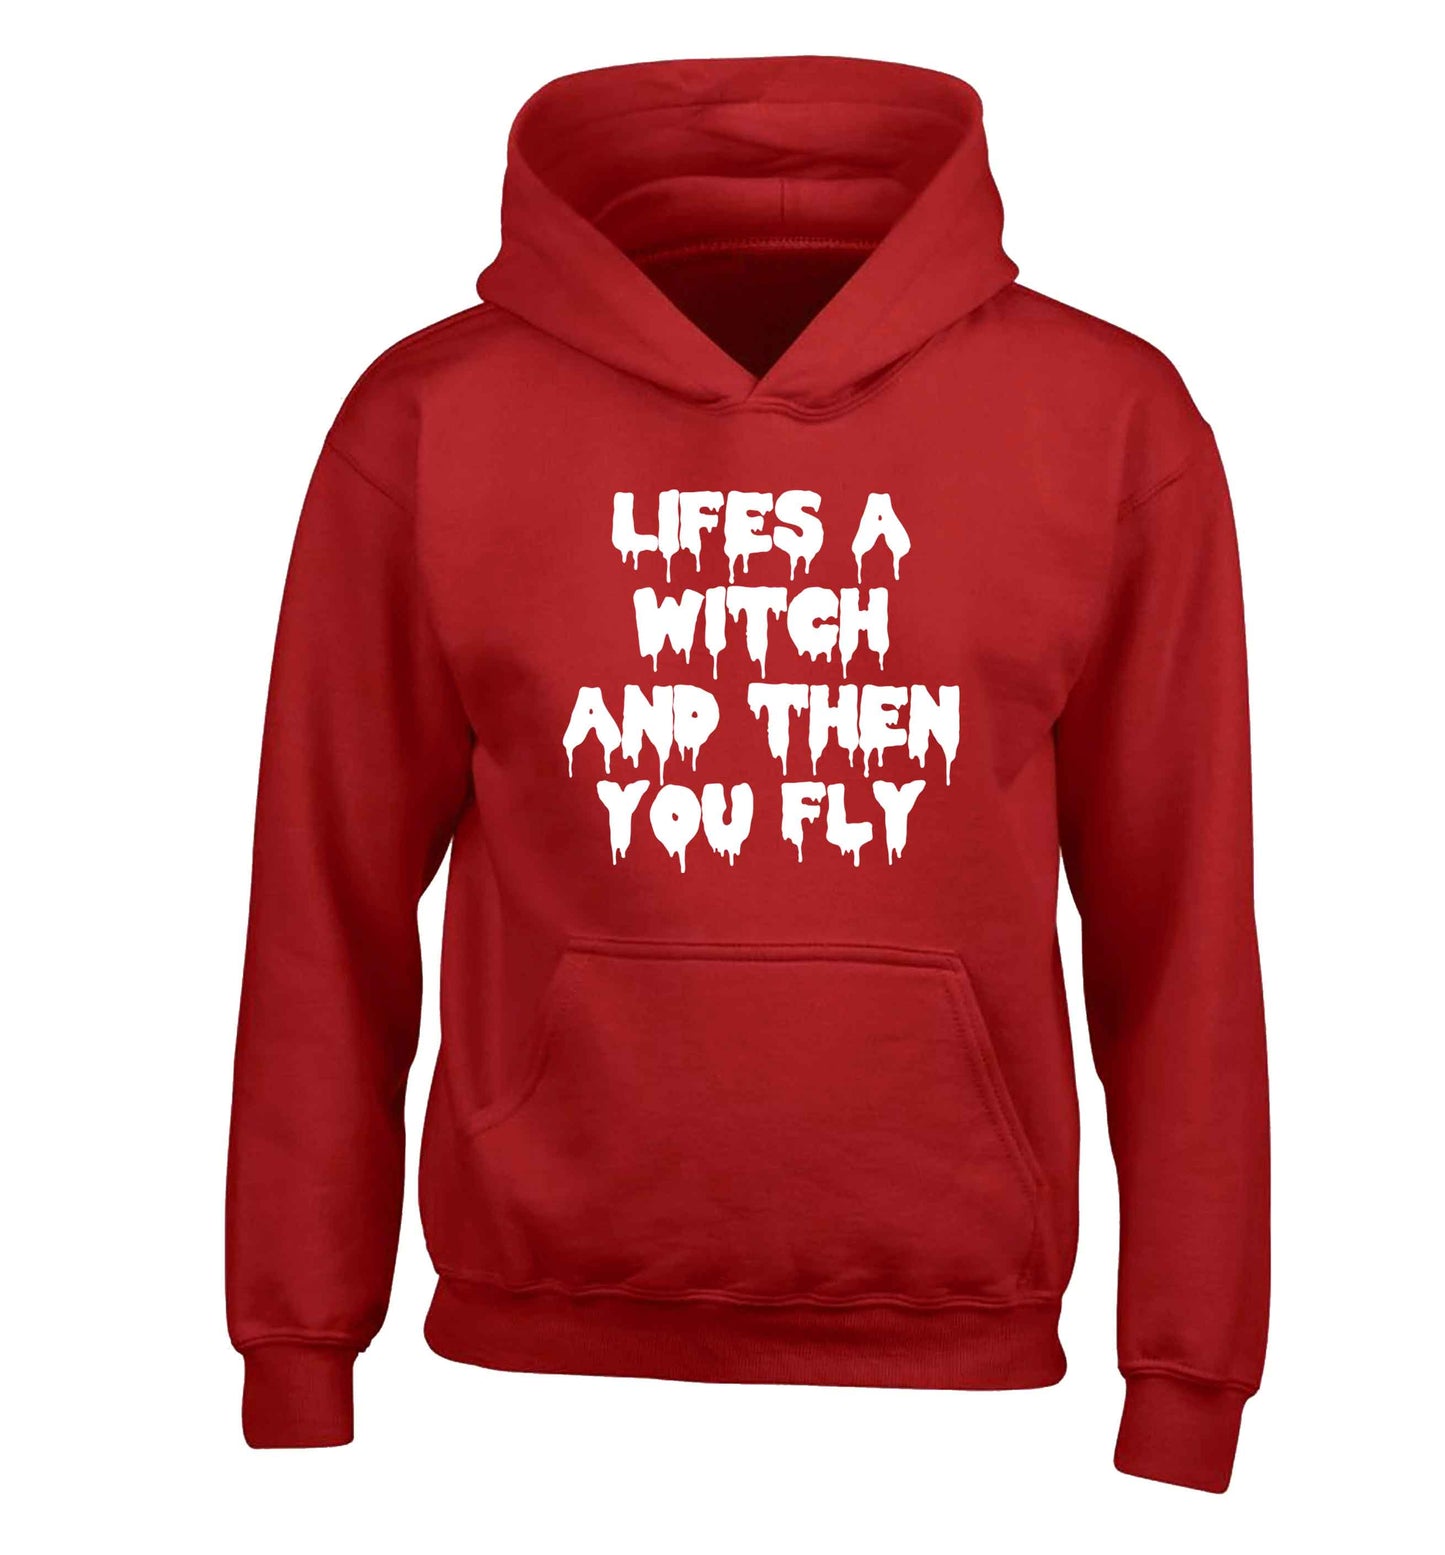 Life's a witch and then you fly children's red hoodie 12-13 Years